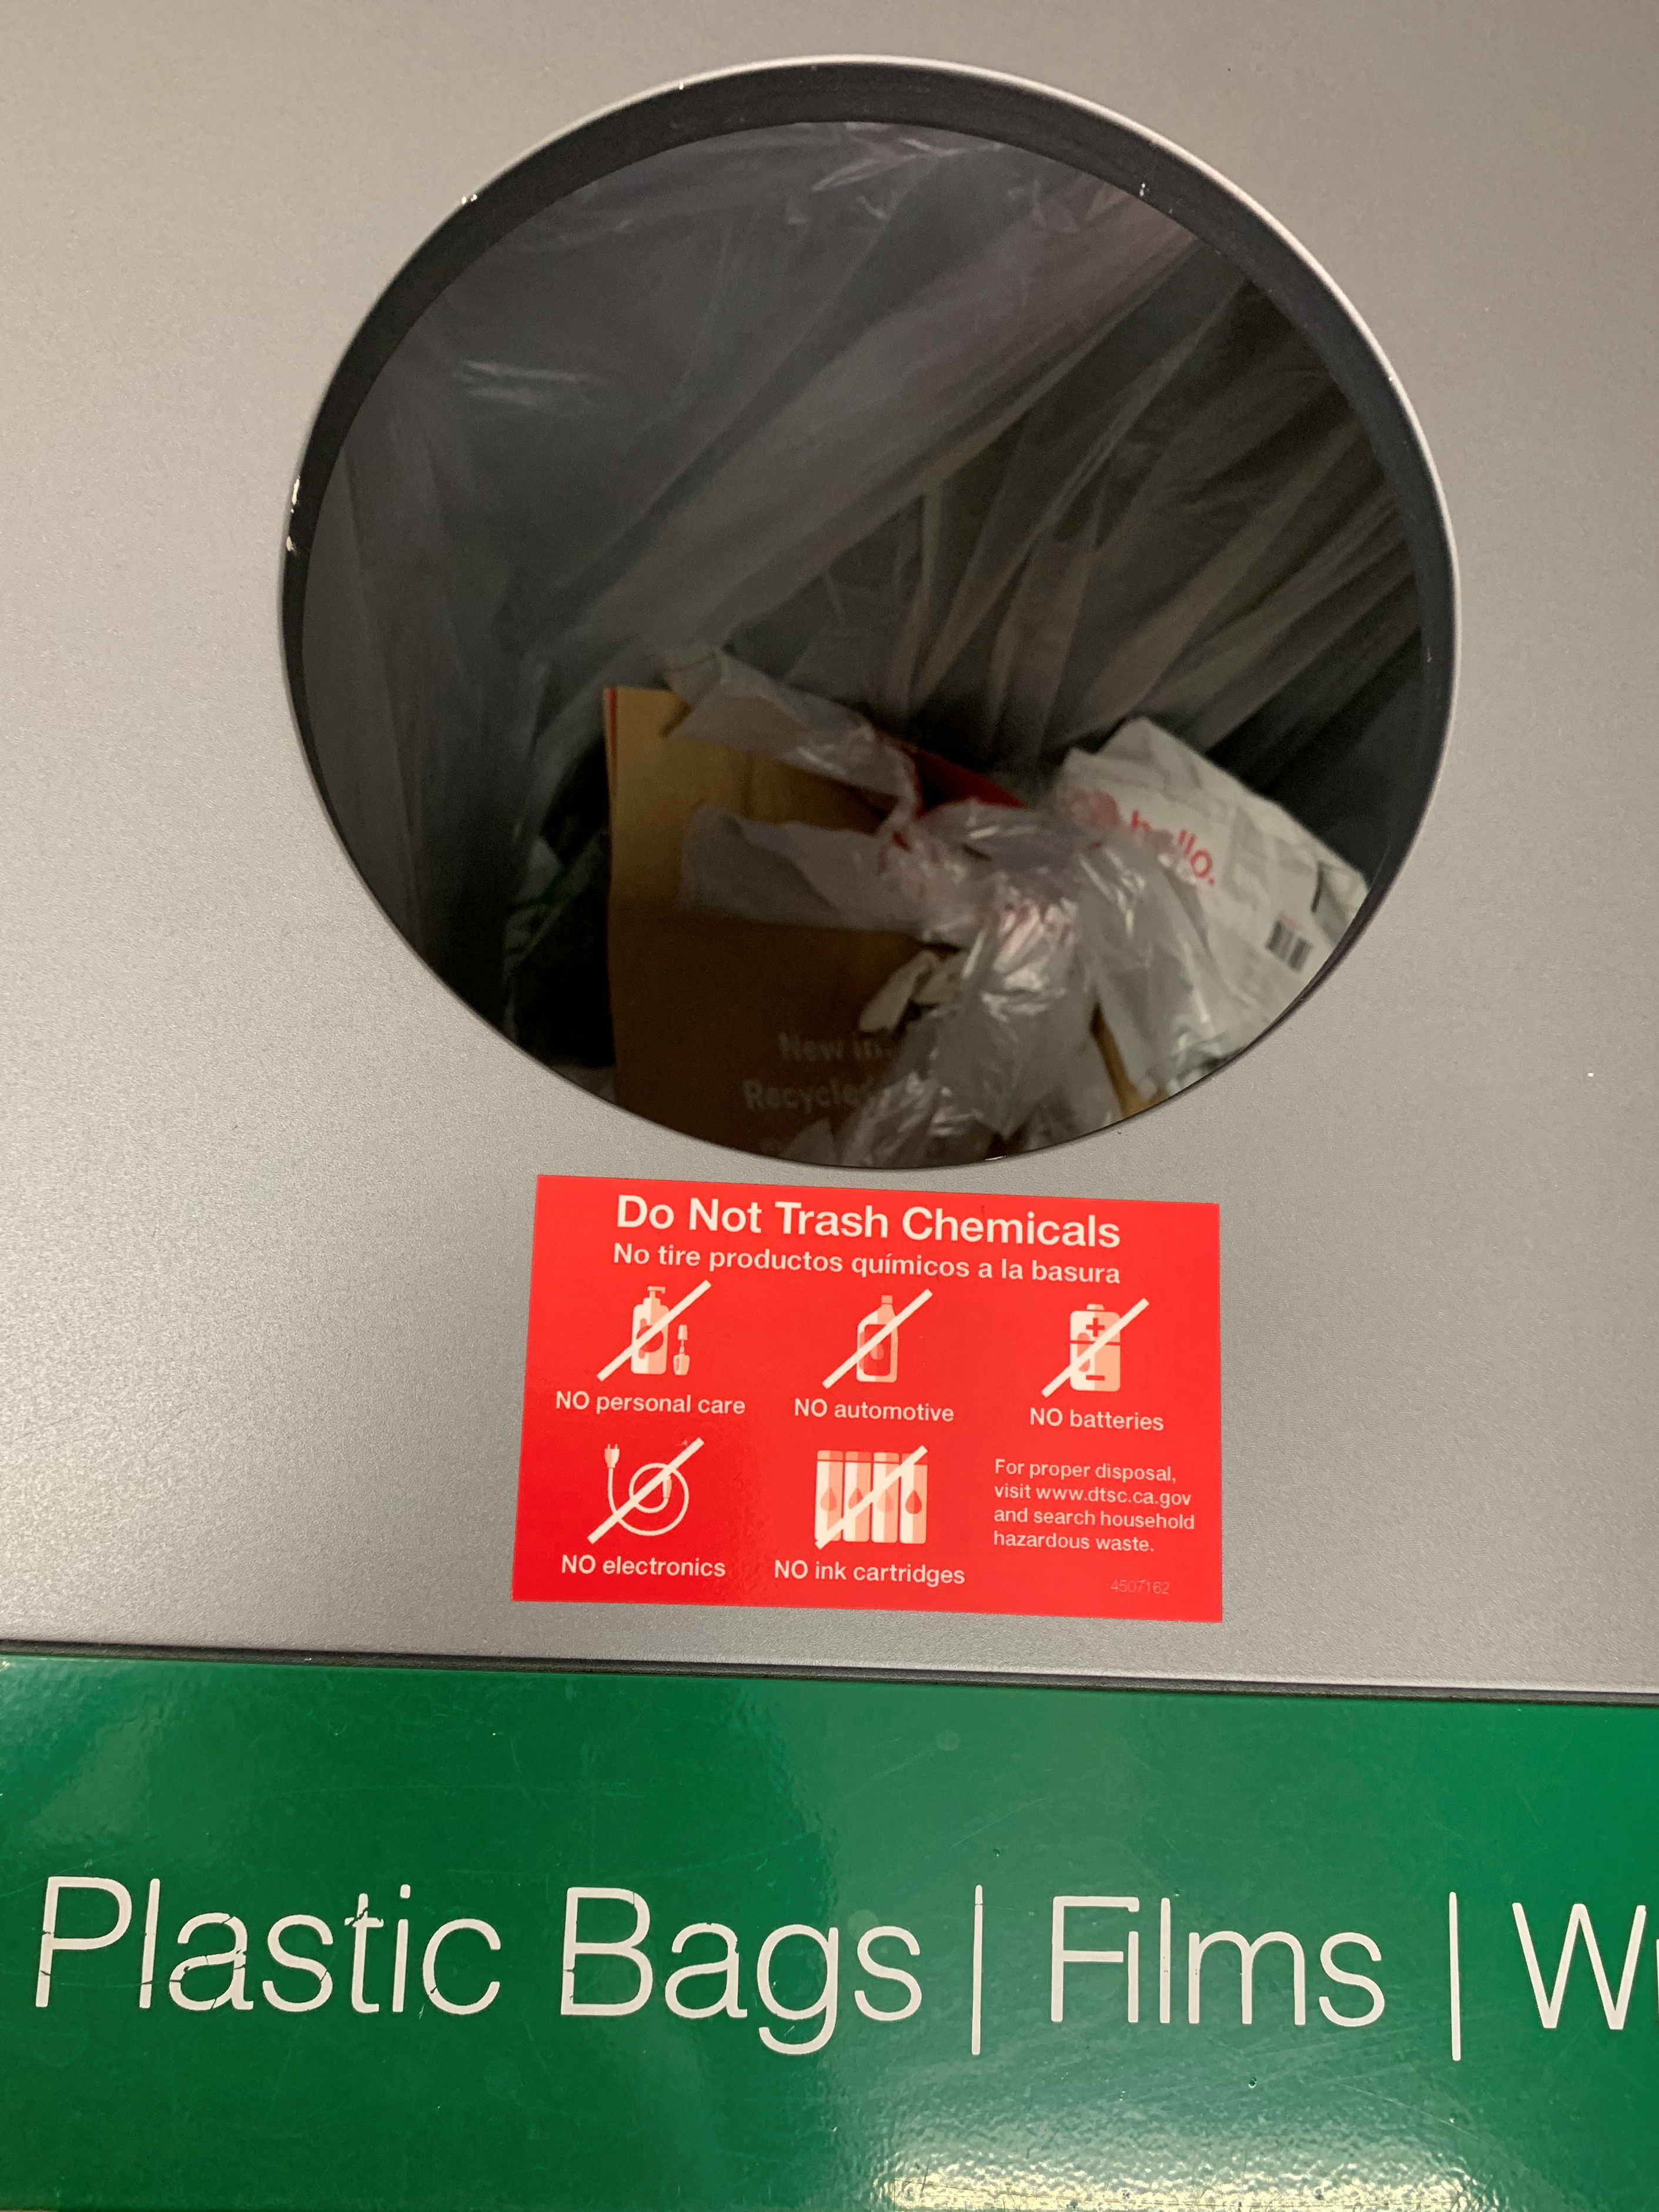 Contamination at a plastic bag store take-back recycling bin at Target in Irvine, California, U.S. in this undated handout. Jan Dell/Handout via REUTERS